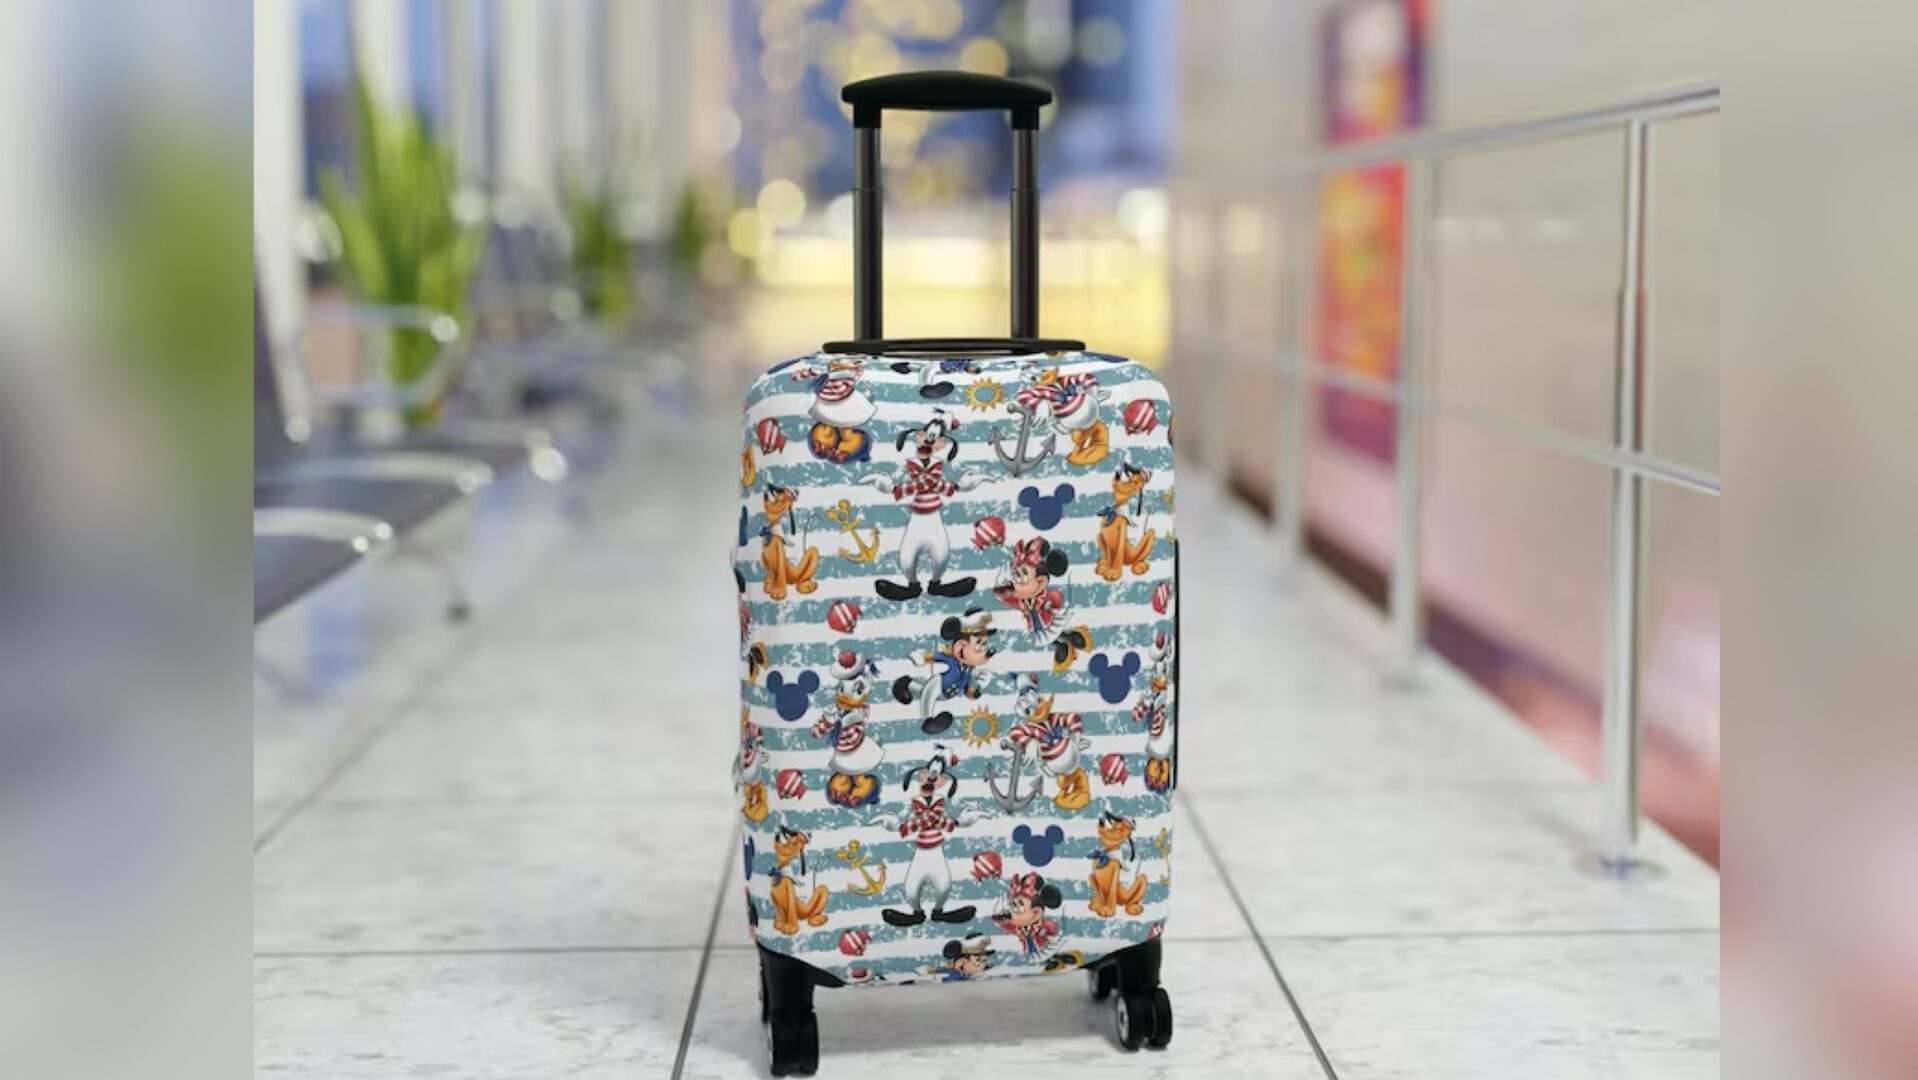 Disney Cruise Line Luggage Cover For Your Next Vacation!